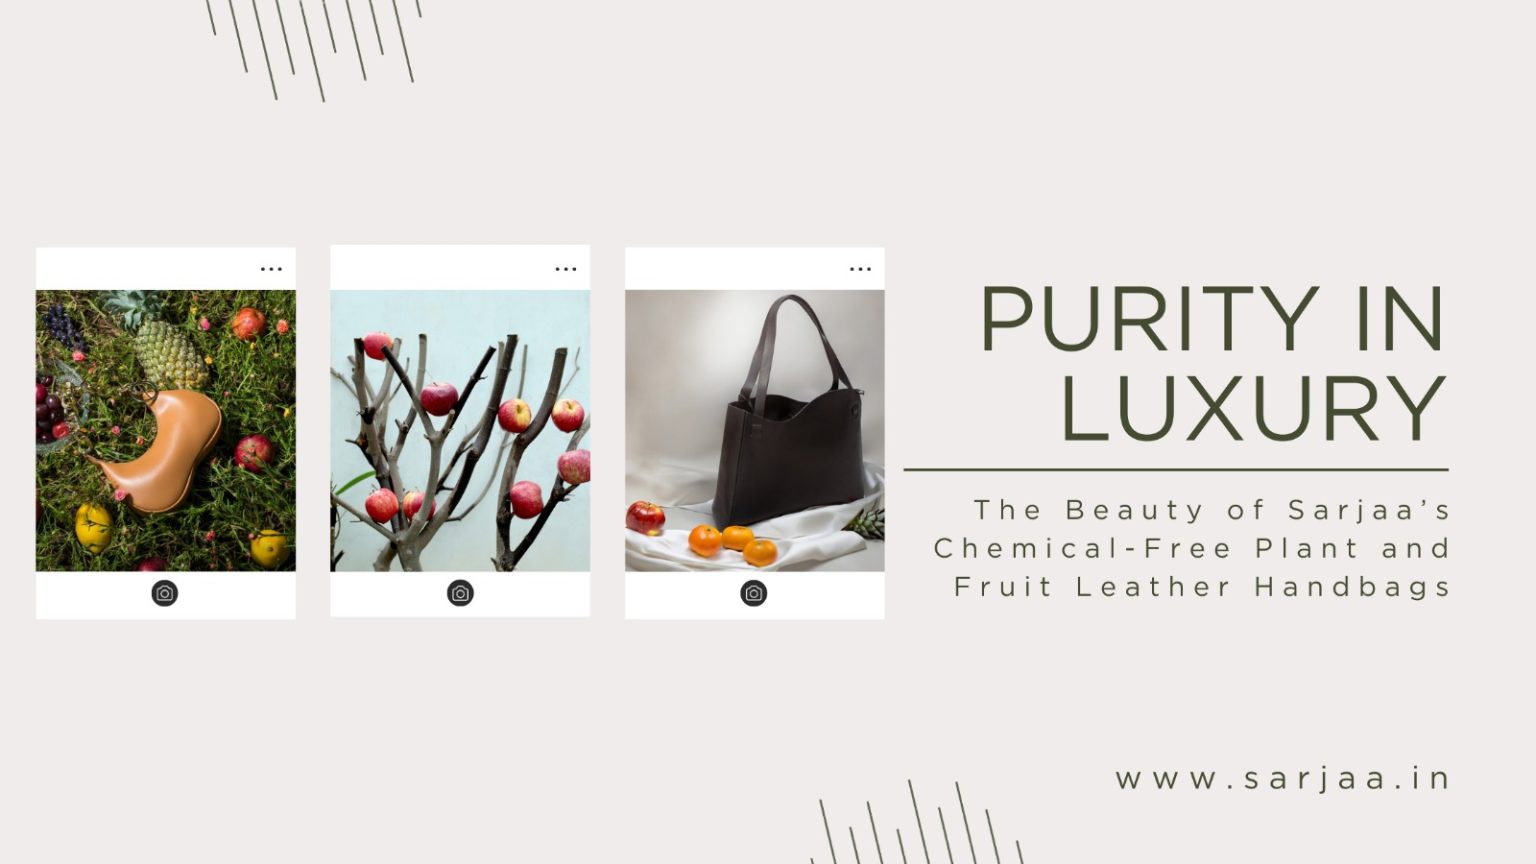  The Beauty of Sarjaa’s Chemical-Free Plant and Fruit Leather Handbags